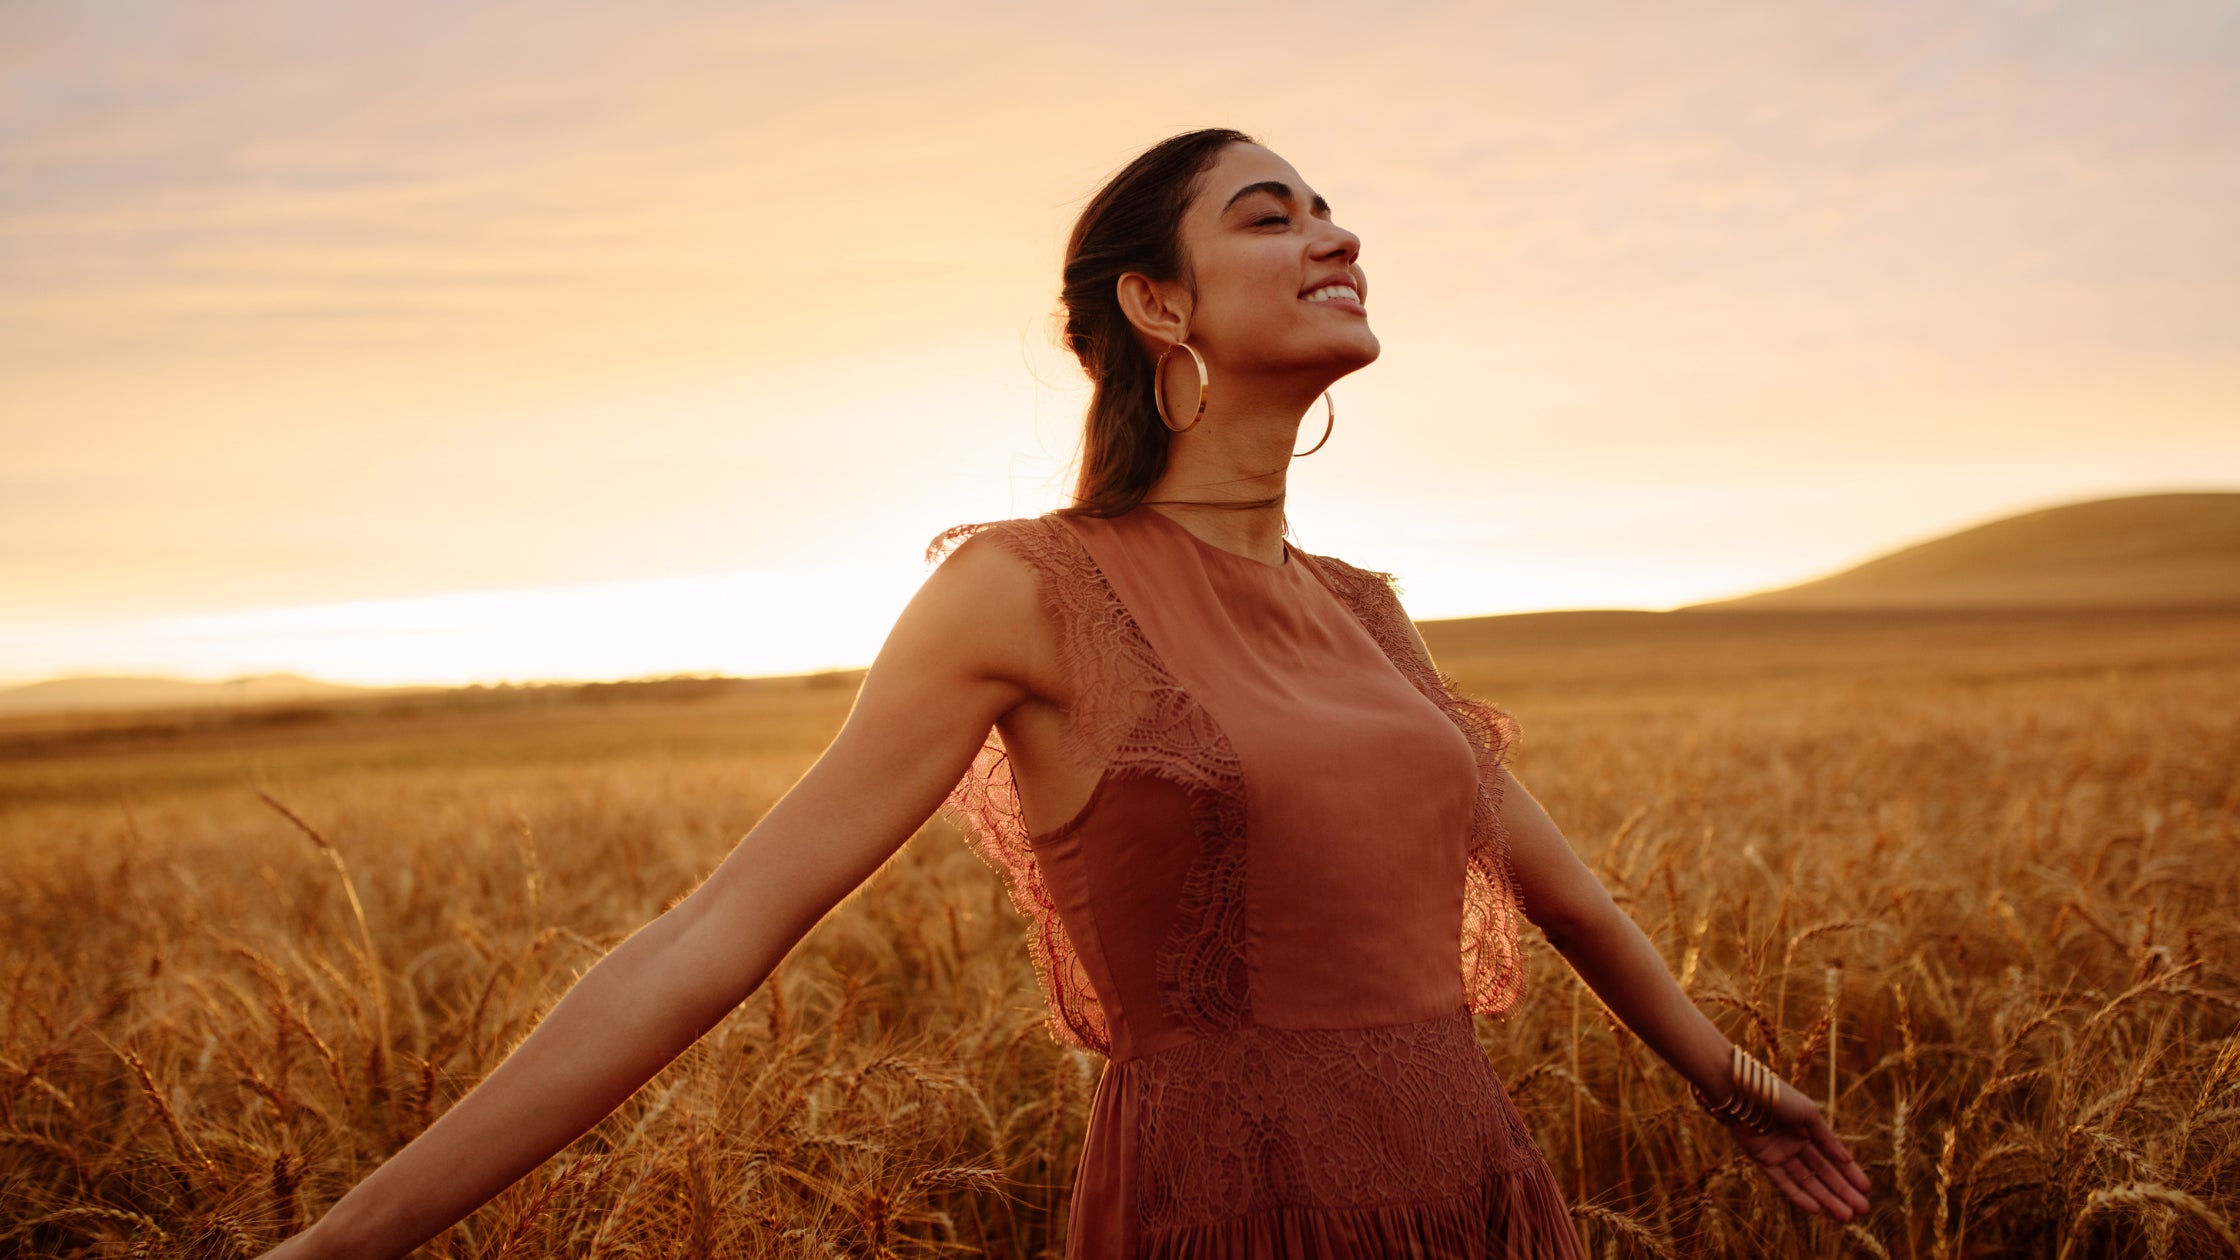 A happy model walking through a wheat field at sunset, symbolizing the joy of using Baily Cosmetics' Leaping Bunny certified, cruelty-free products.